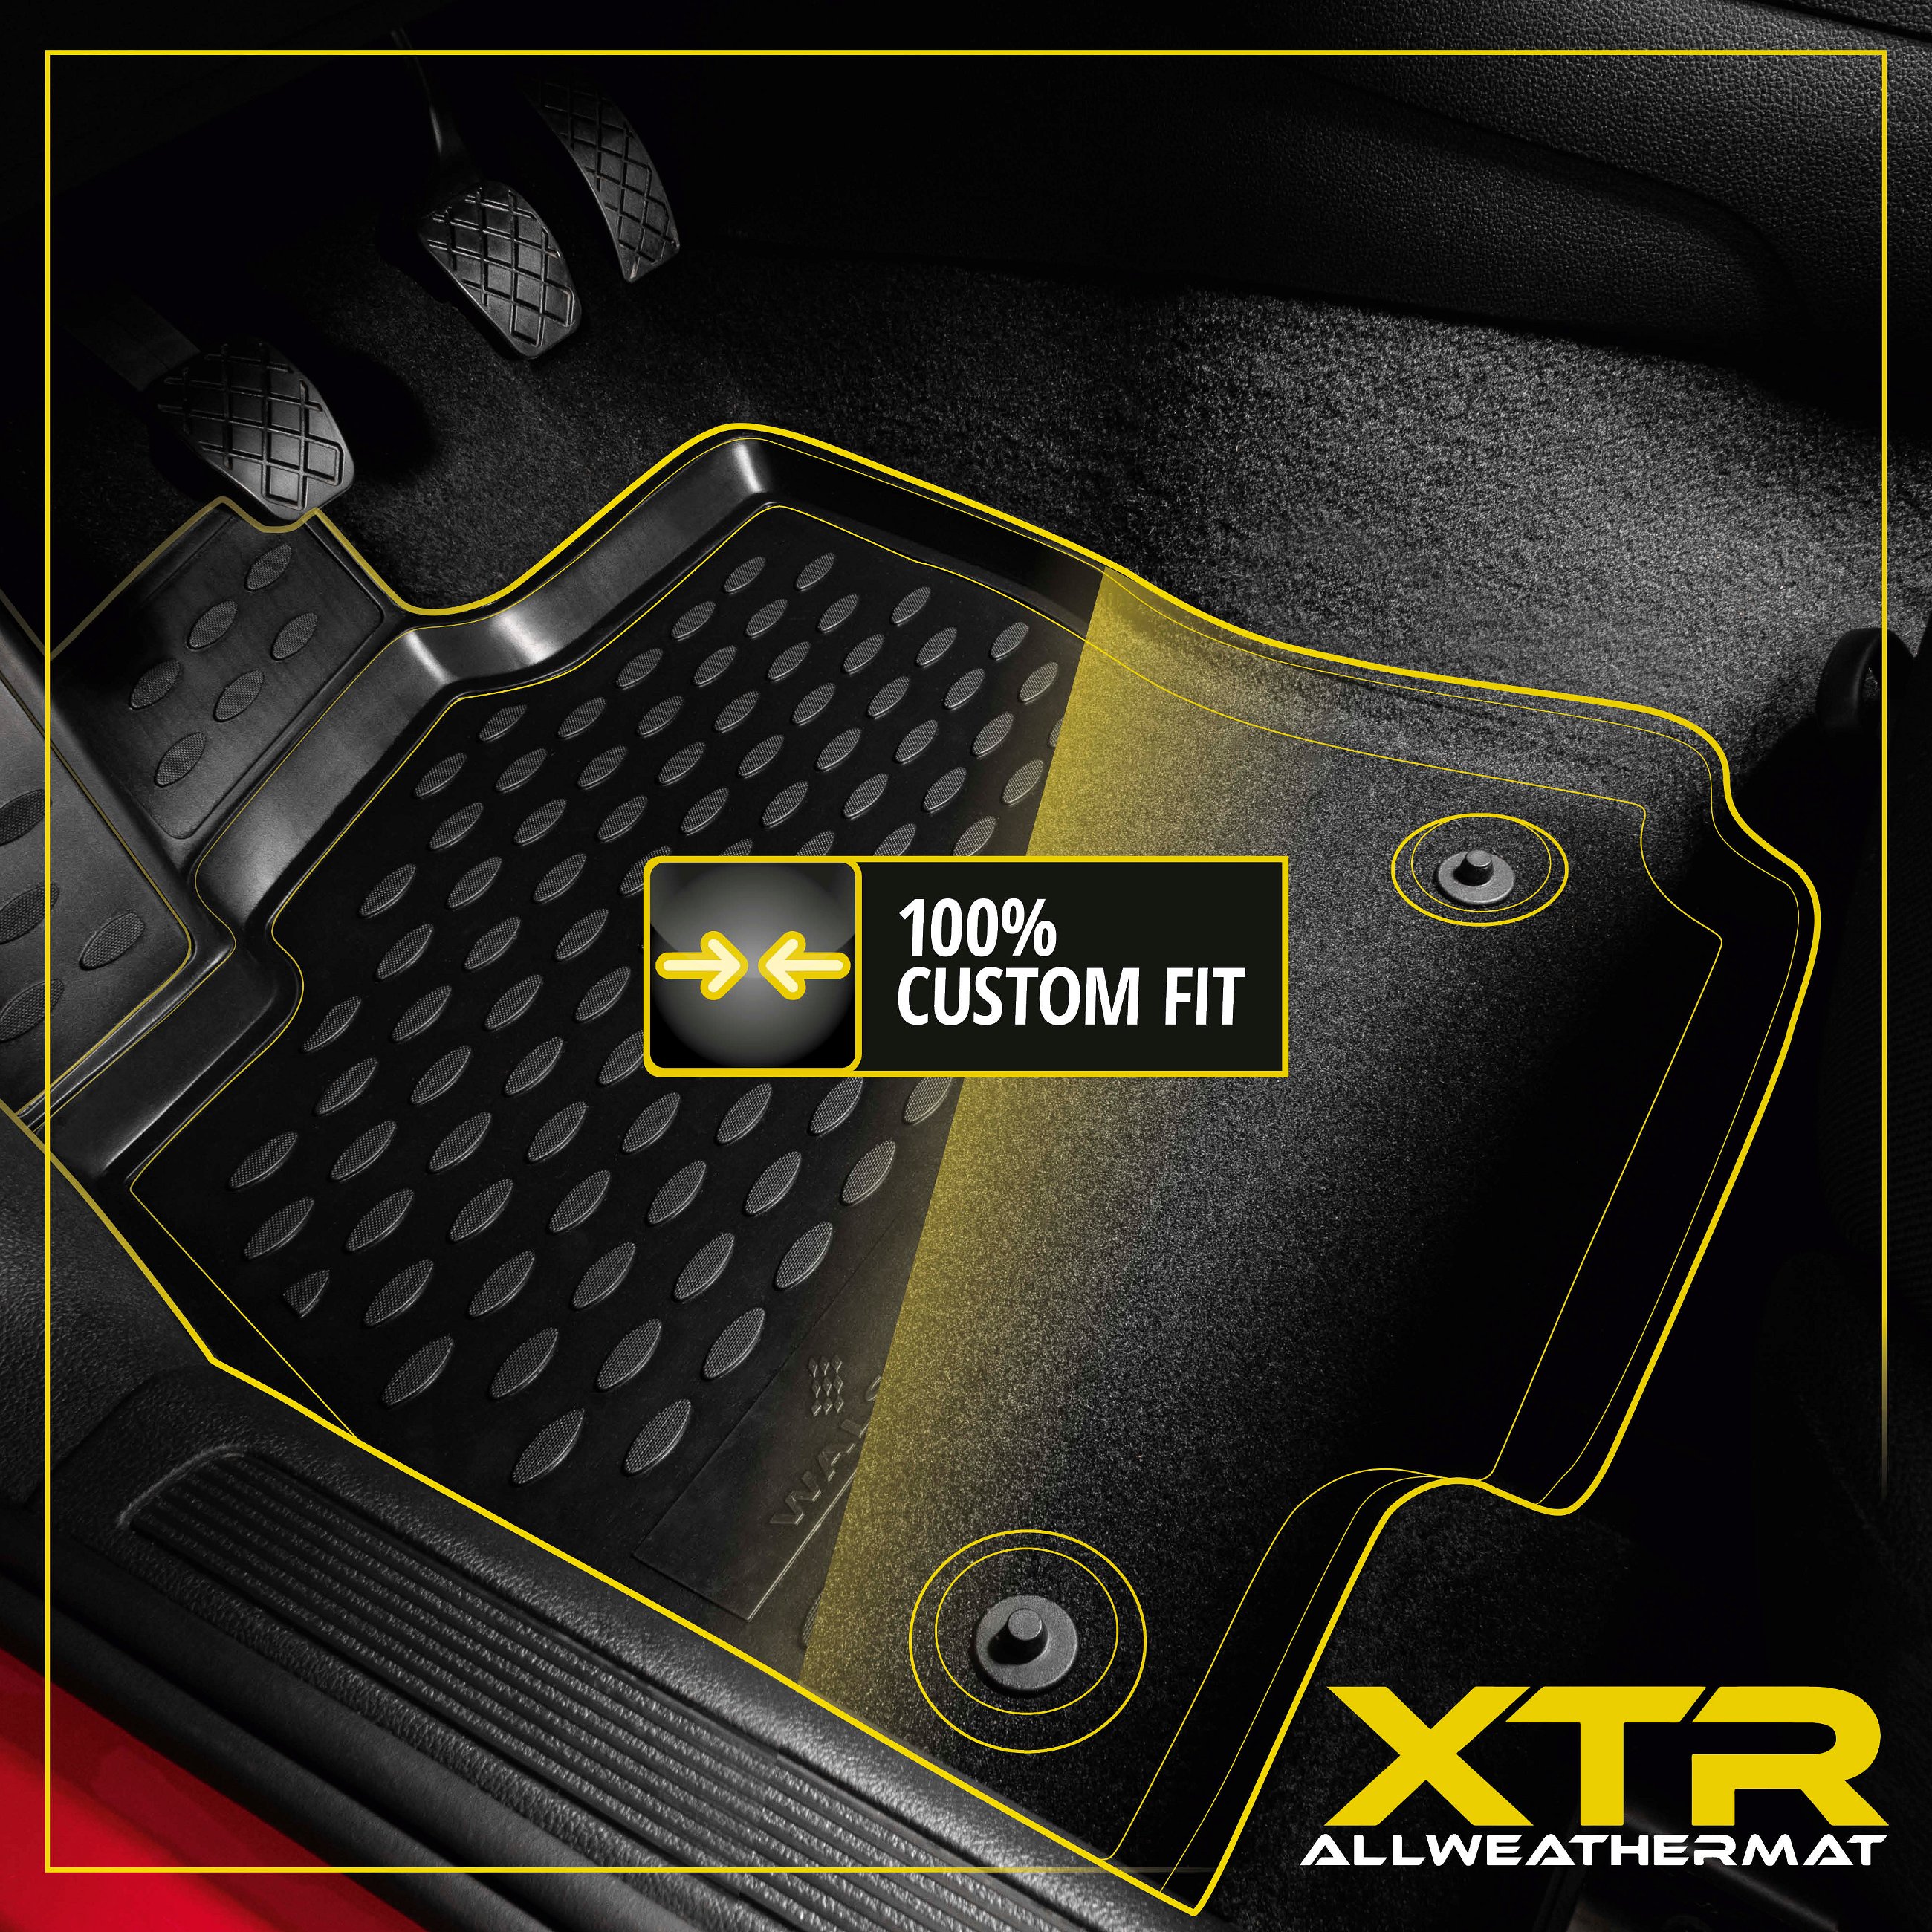 XTR Rubber Mats for Fiat Tipo notchback 10/2015-Today